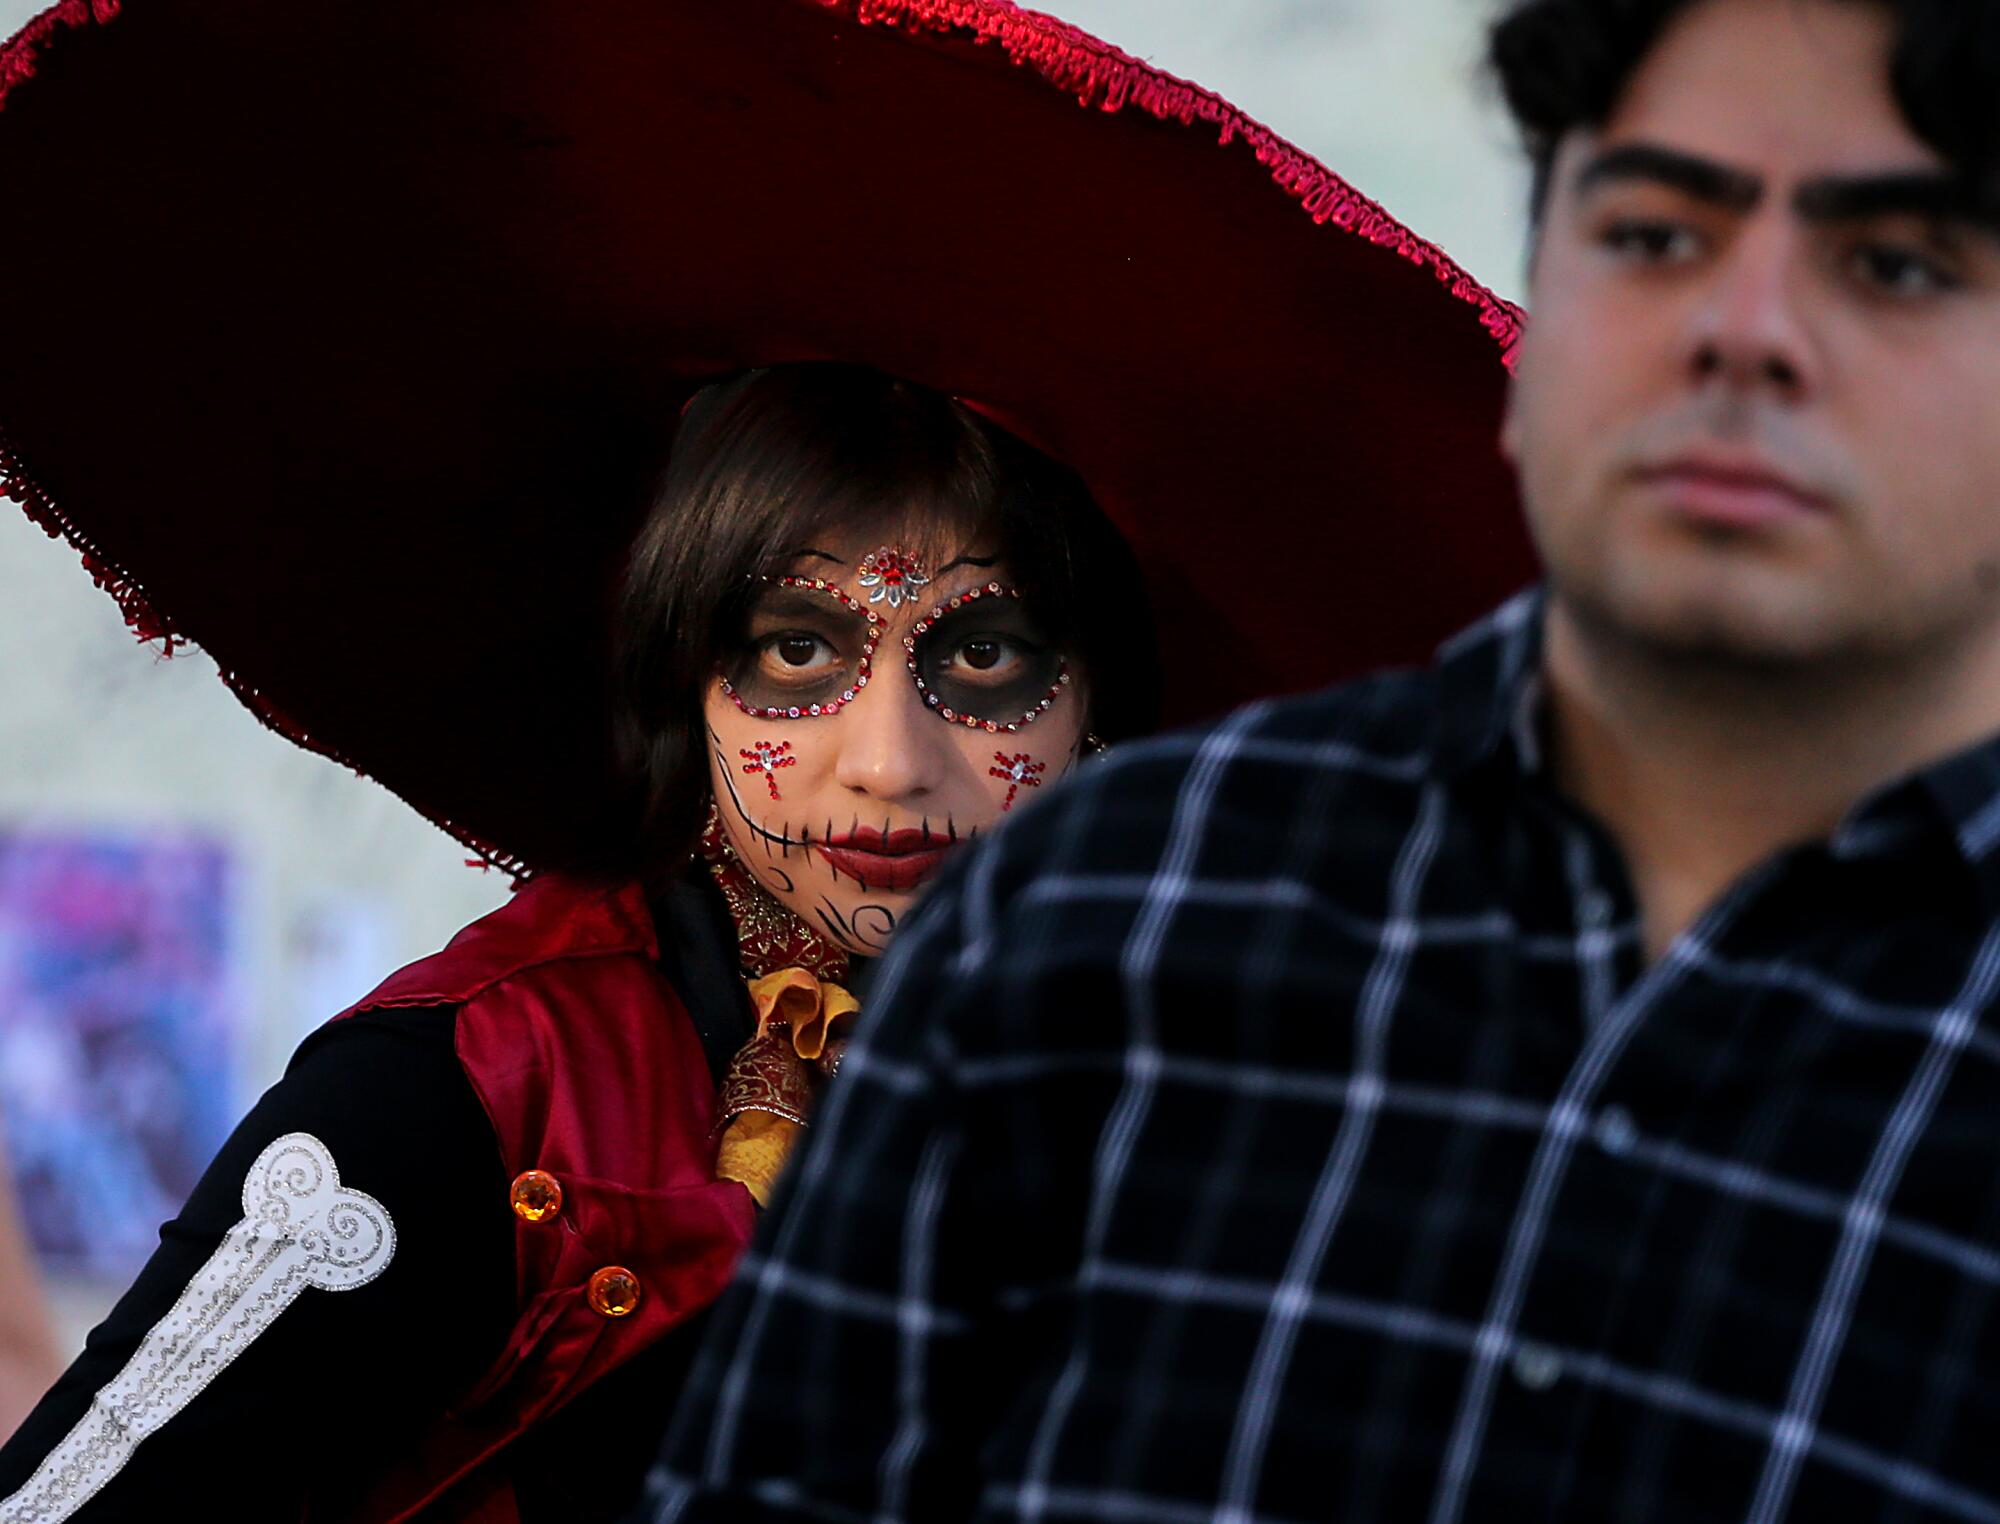 Meztly Villegas wears a red catrina dress and face paint while standing near a man.